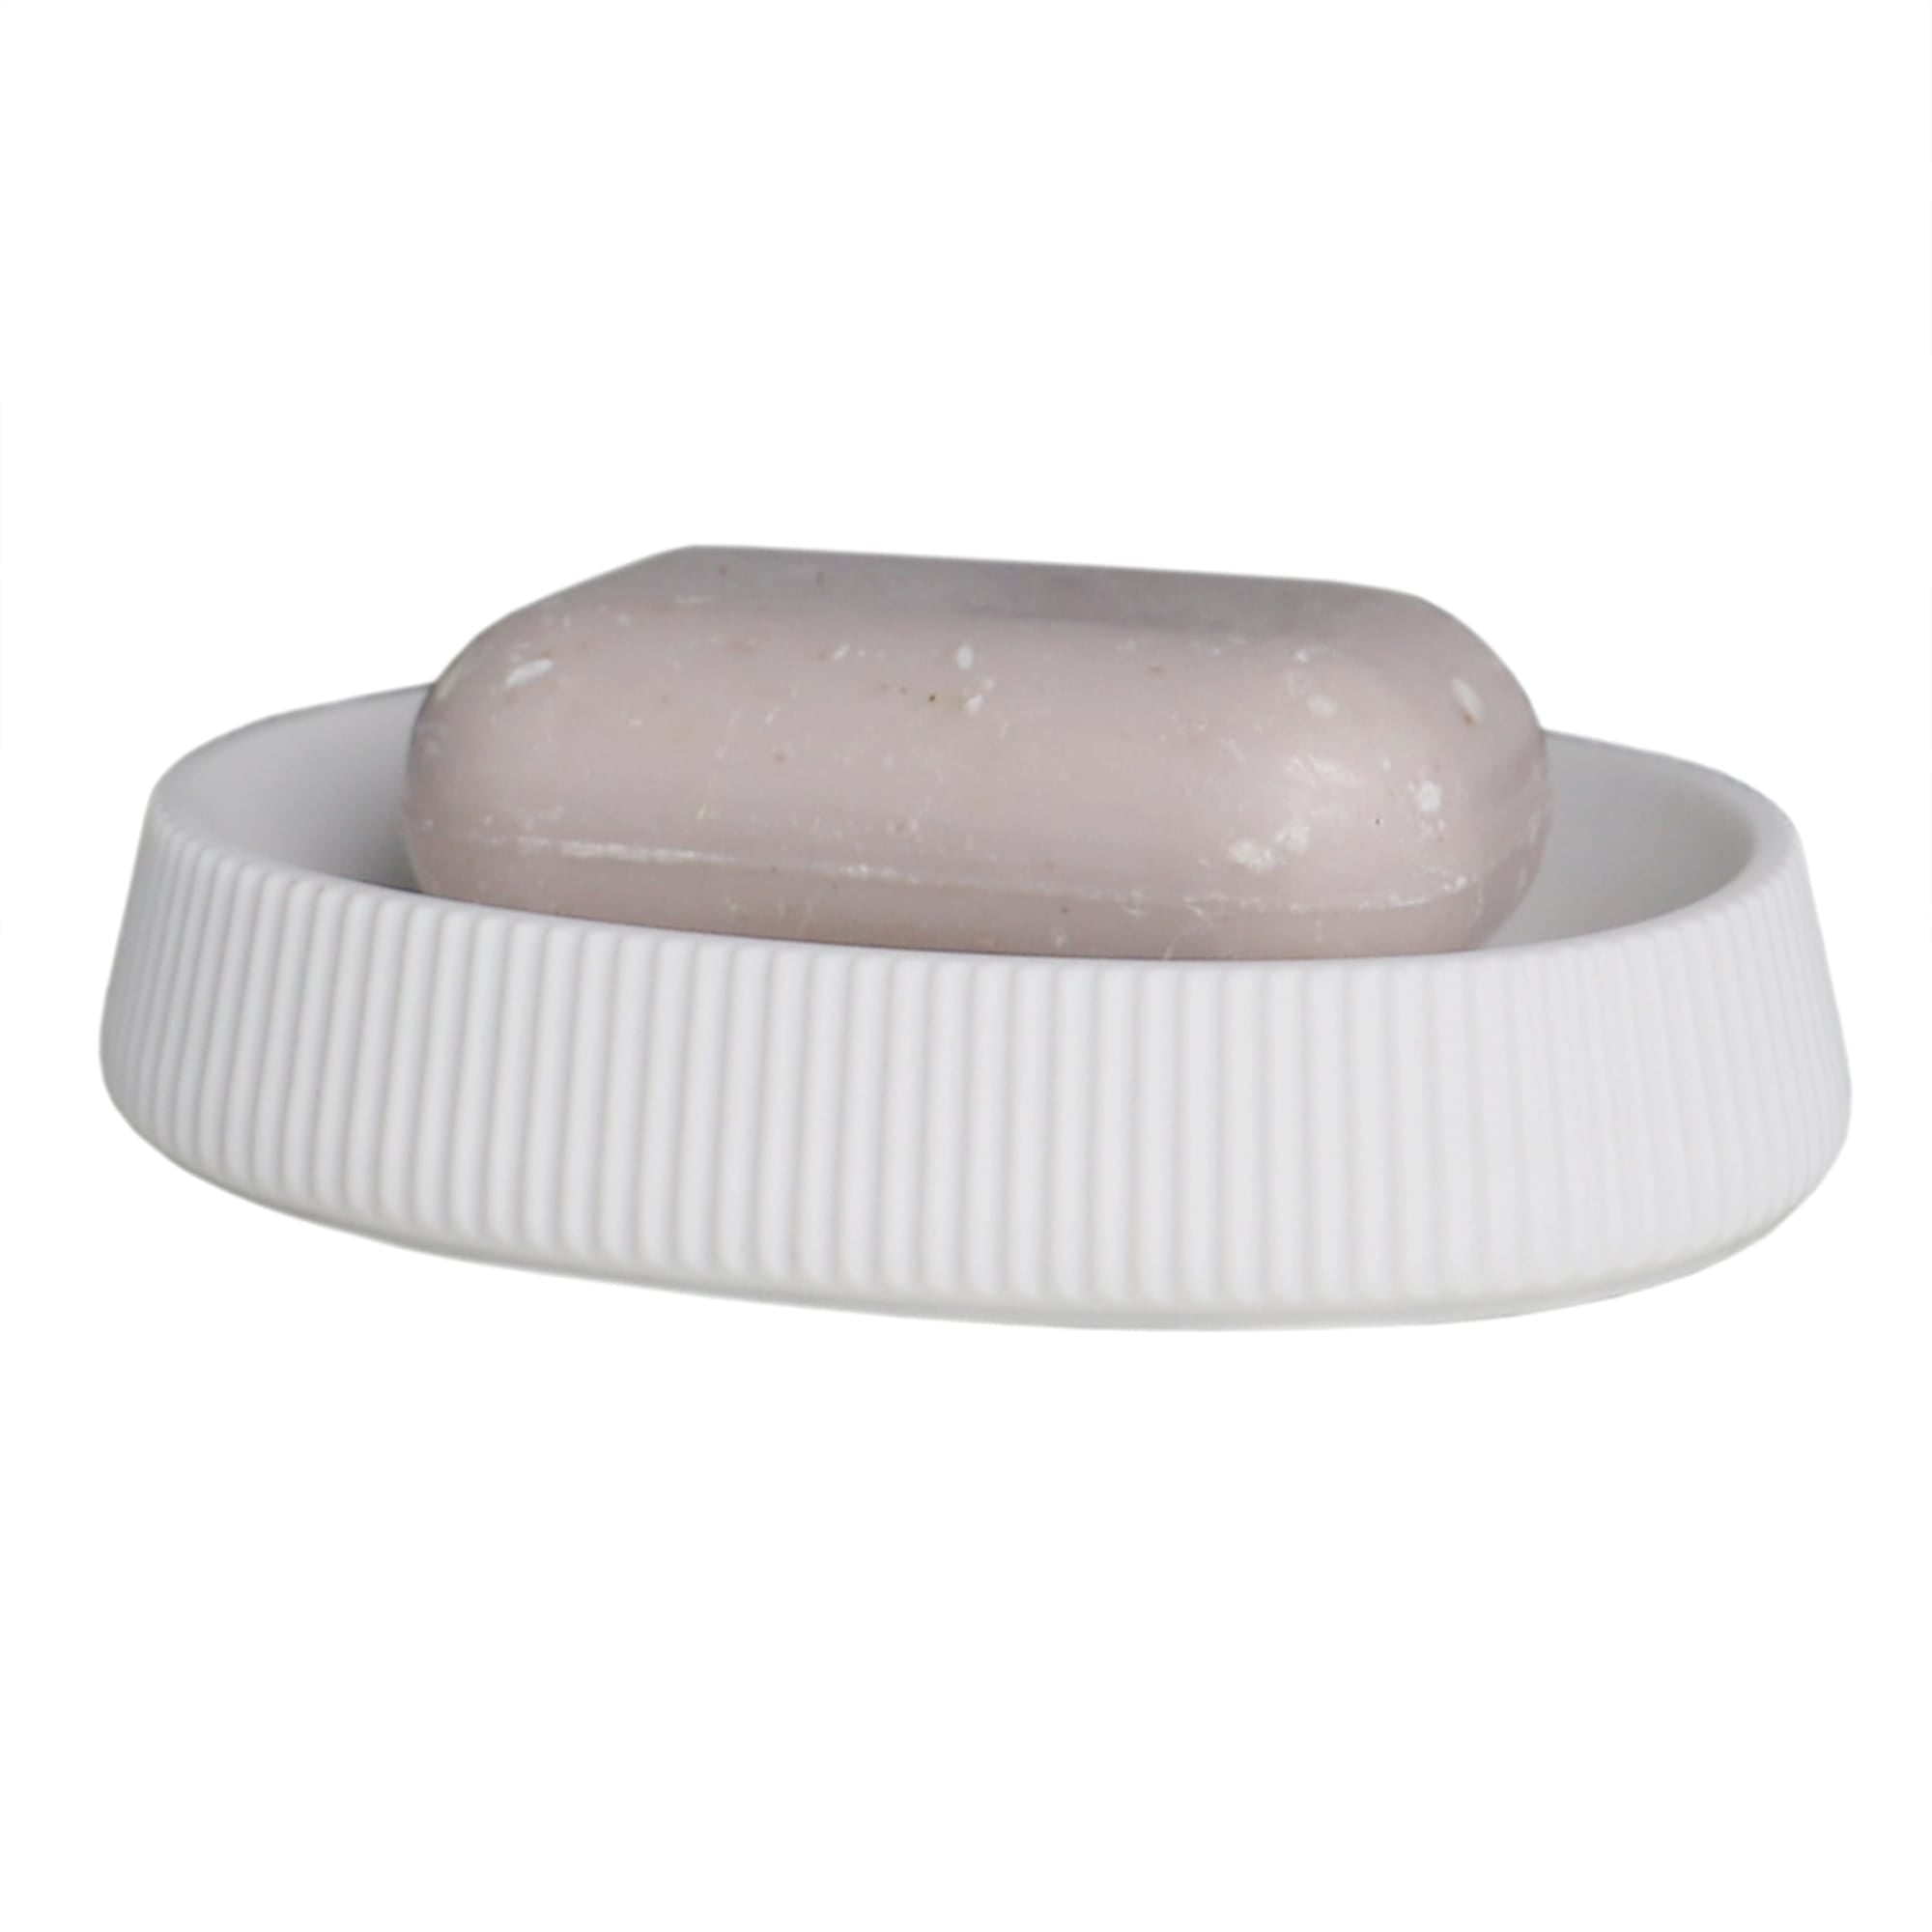 Home Basics Rubberized Plastic Soap Dish with Textured Outer Edges, White $3 EACH, CASE PACK OF 12